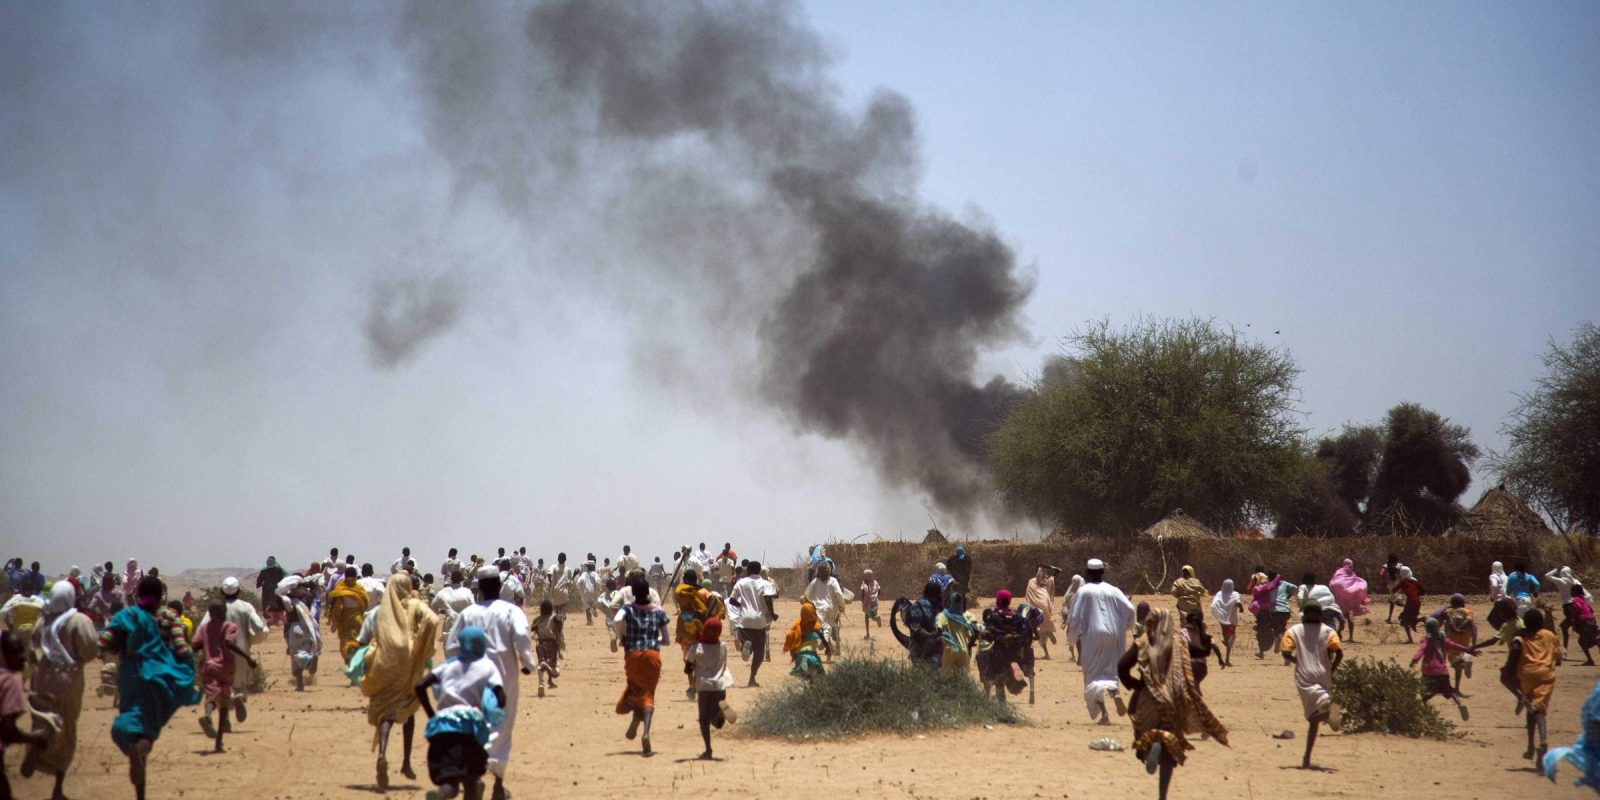 The UN agreed on the timing of ending peacekeeping missions in Sudan's Darfur